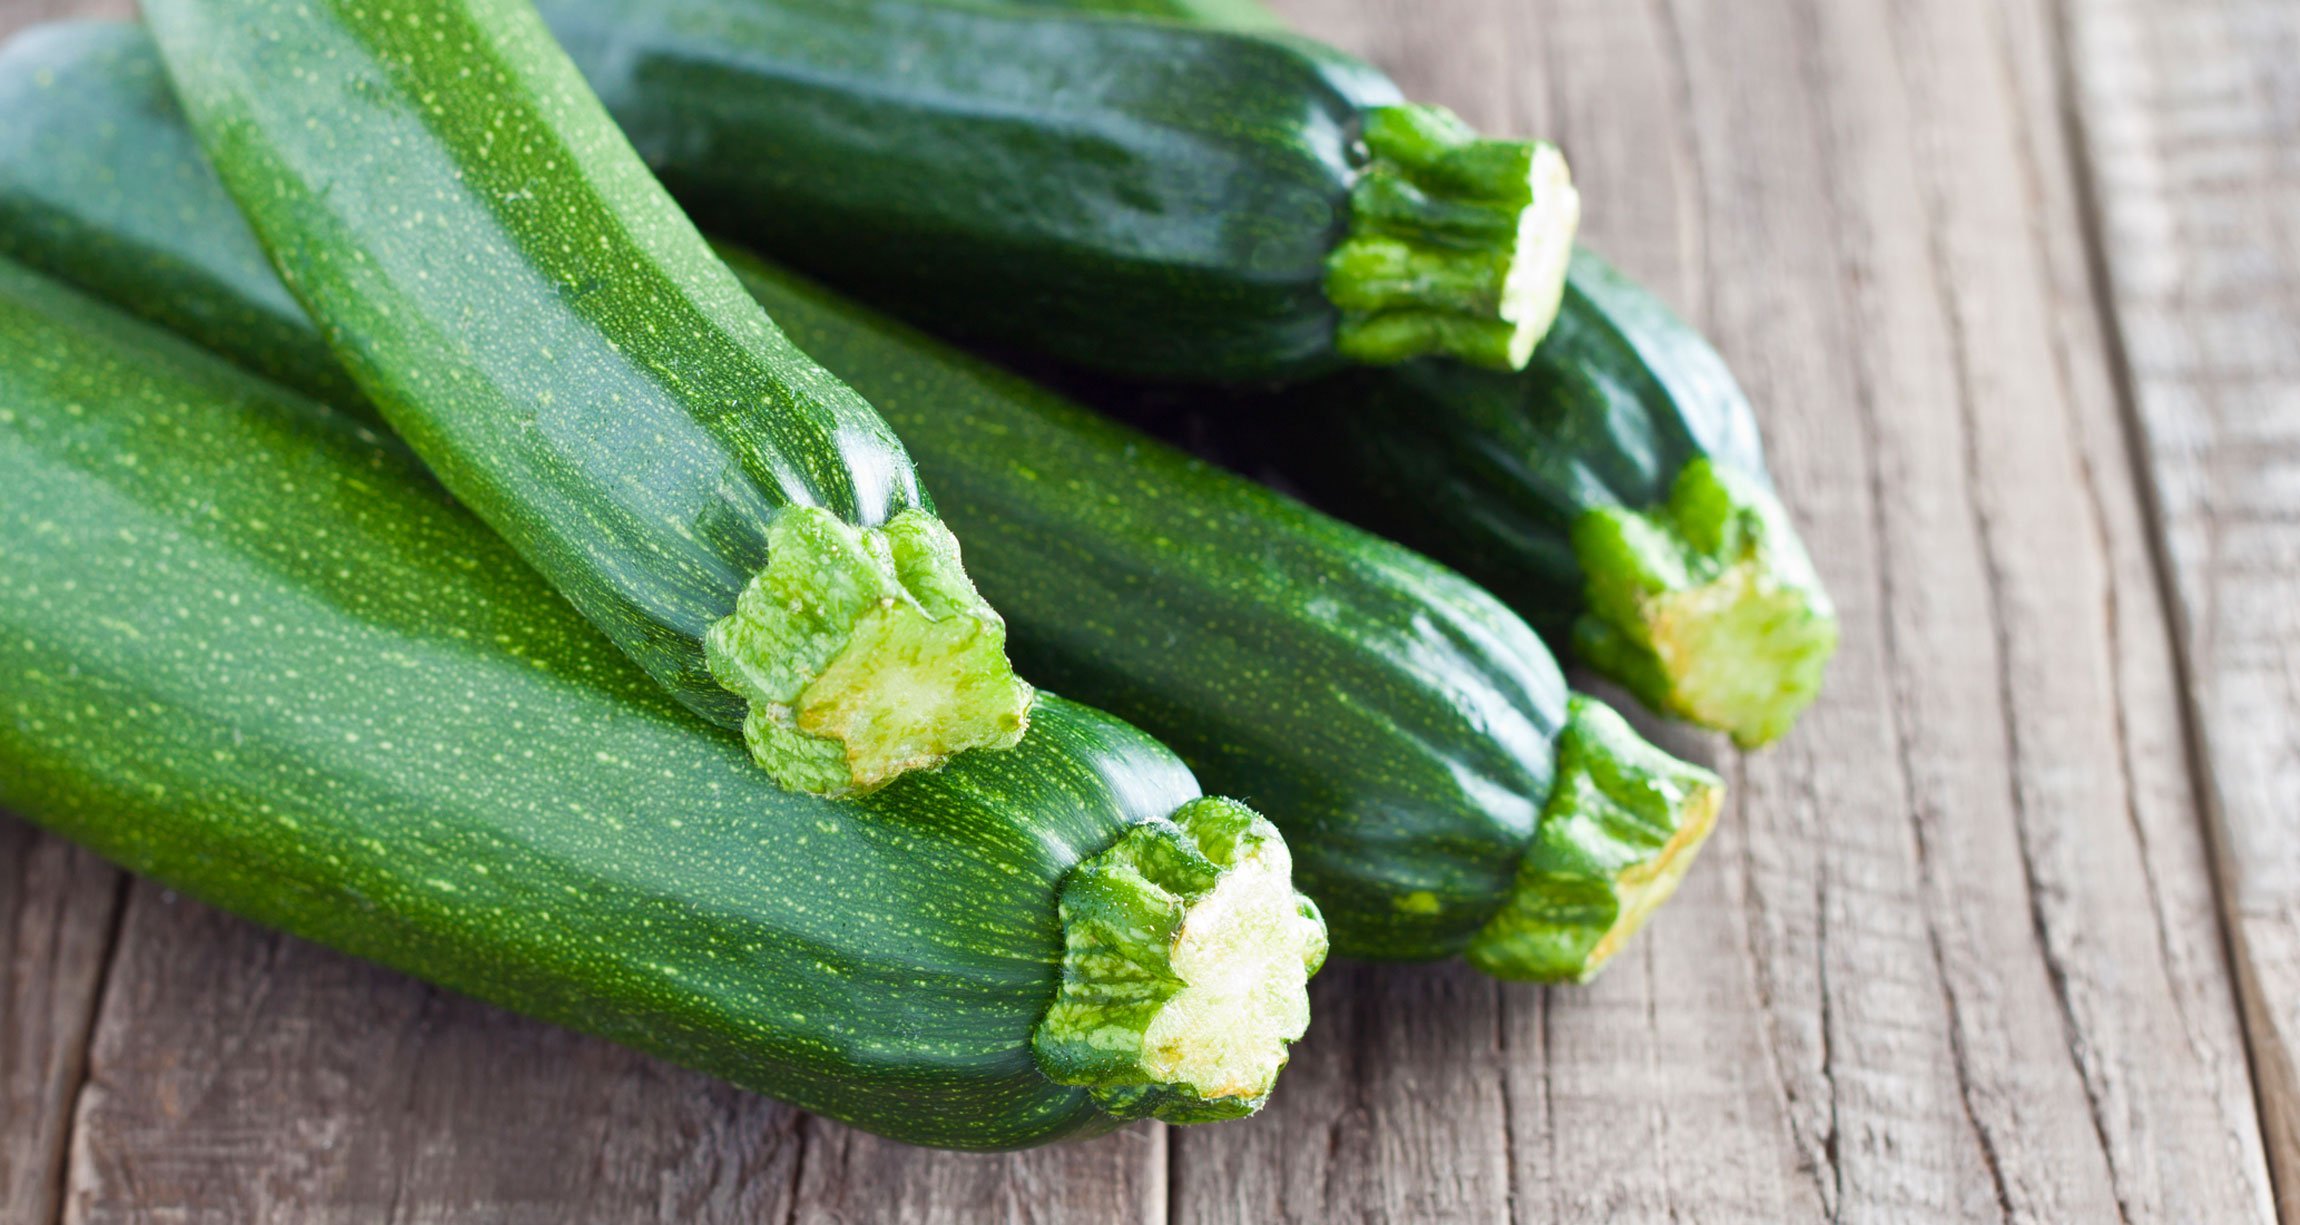 Image result for zucchini